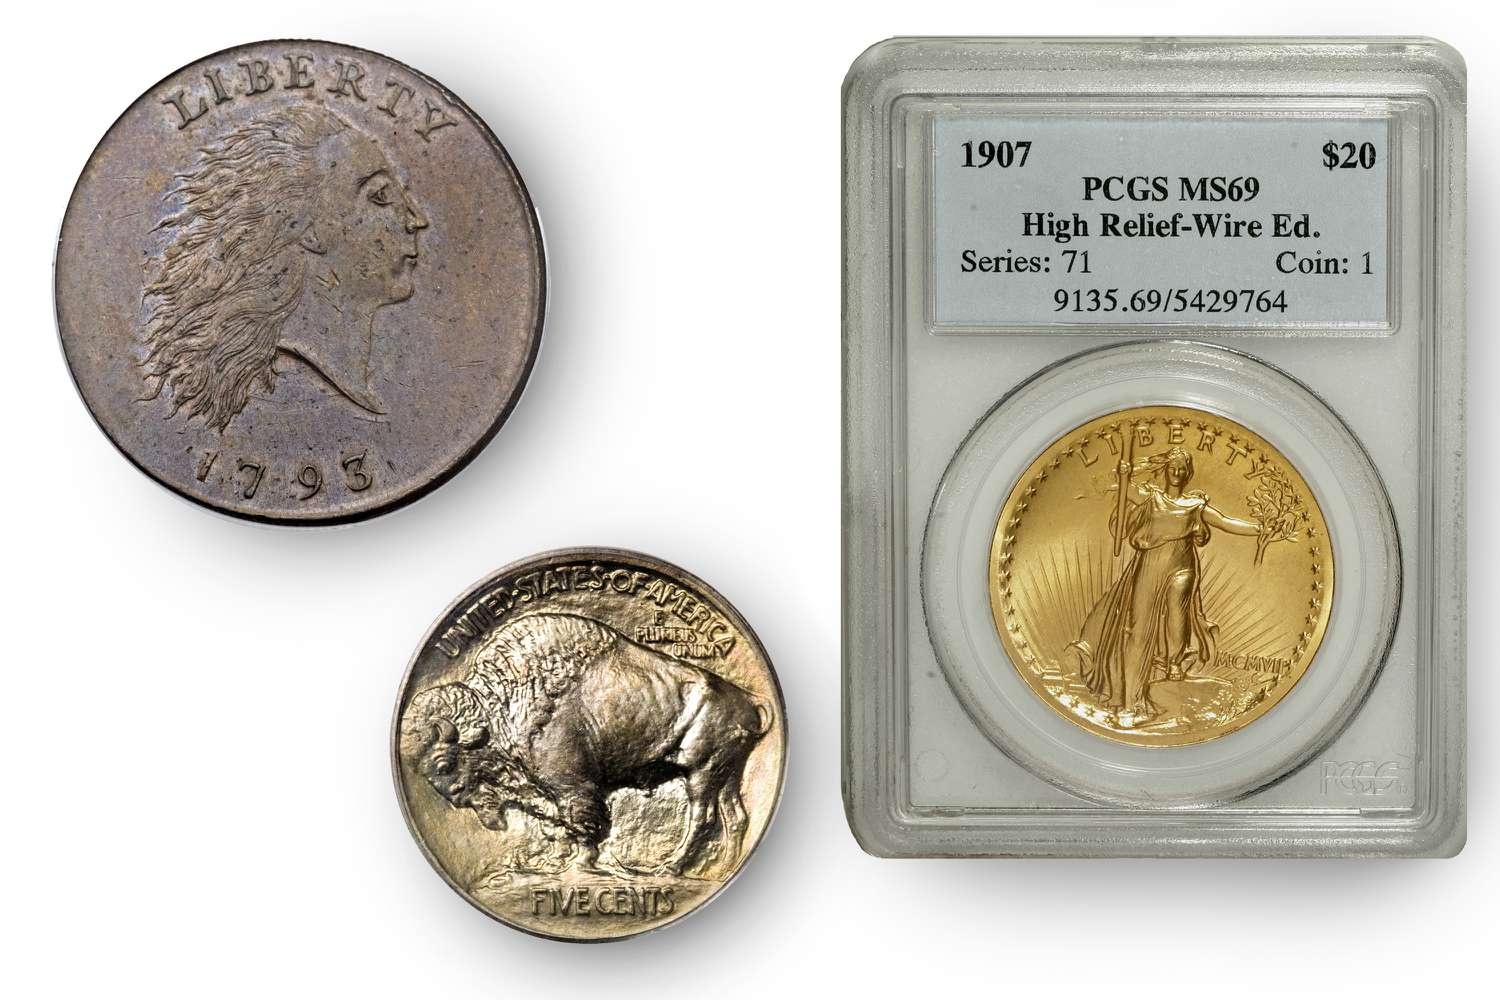 ‎The Expert's Guide to Collecting & Investing In Rare Coins on Apple Books